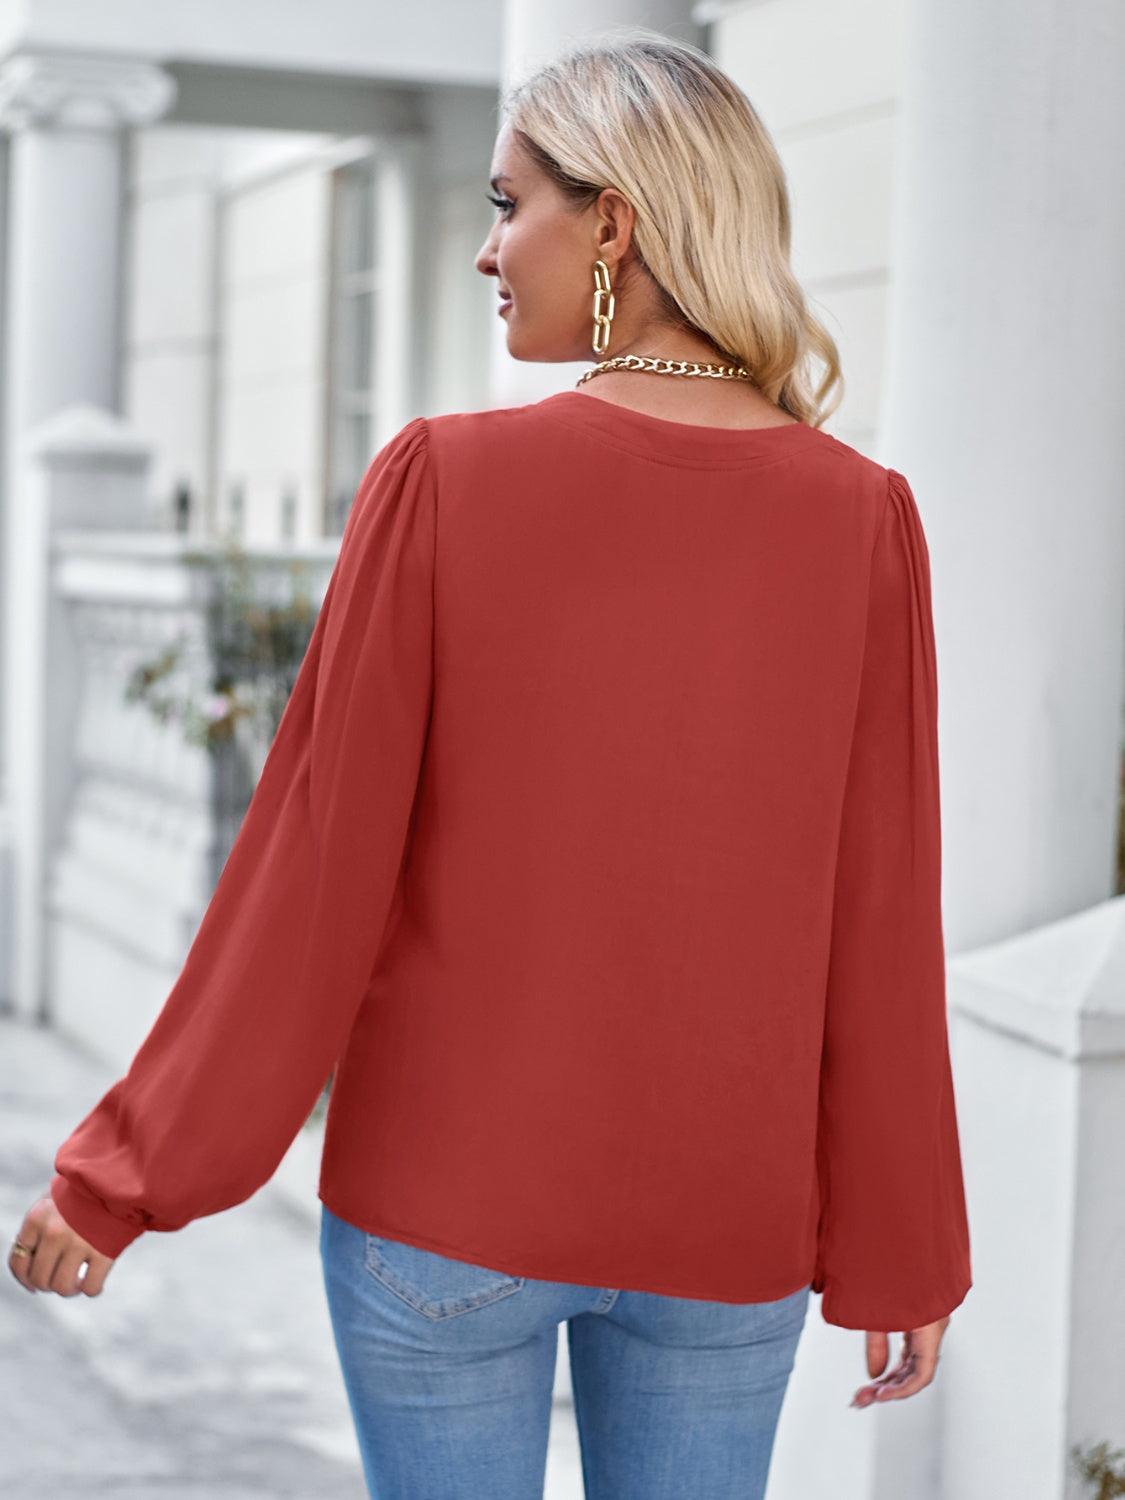 Notched Neck Blouse with Puff Sleeves - Shop the Latest Fashion!